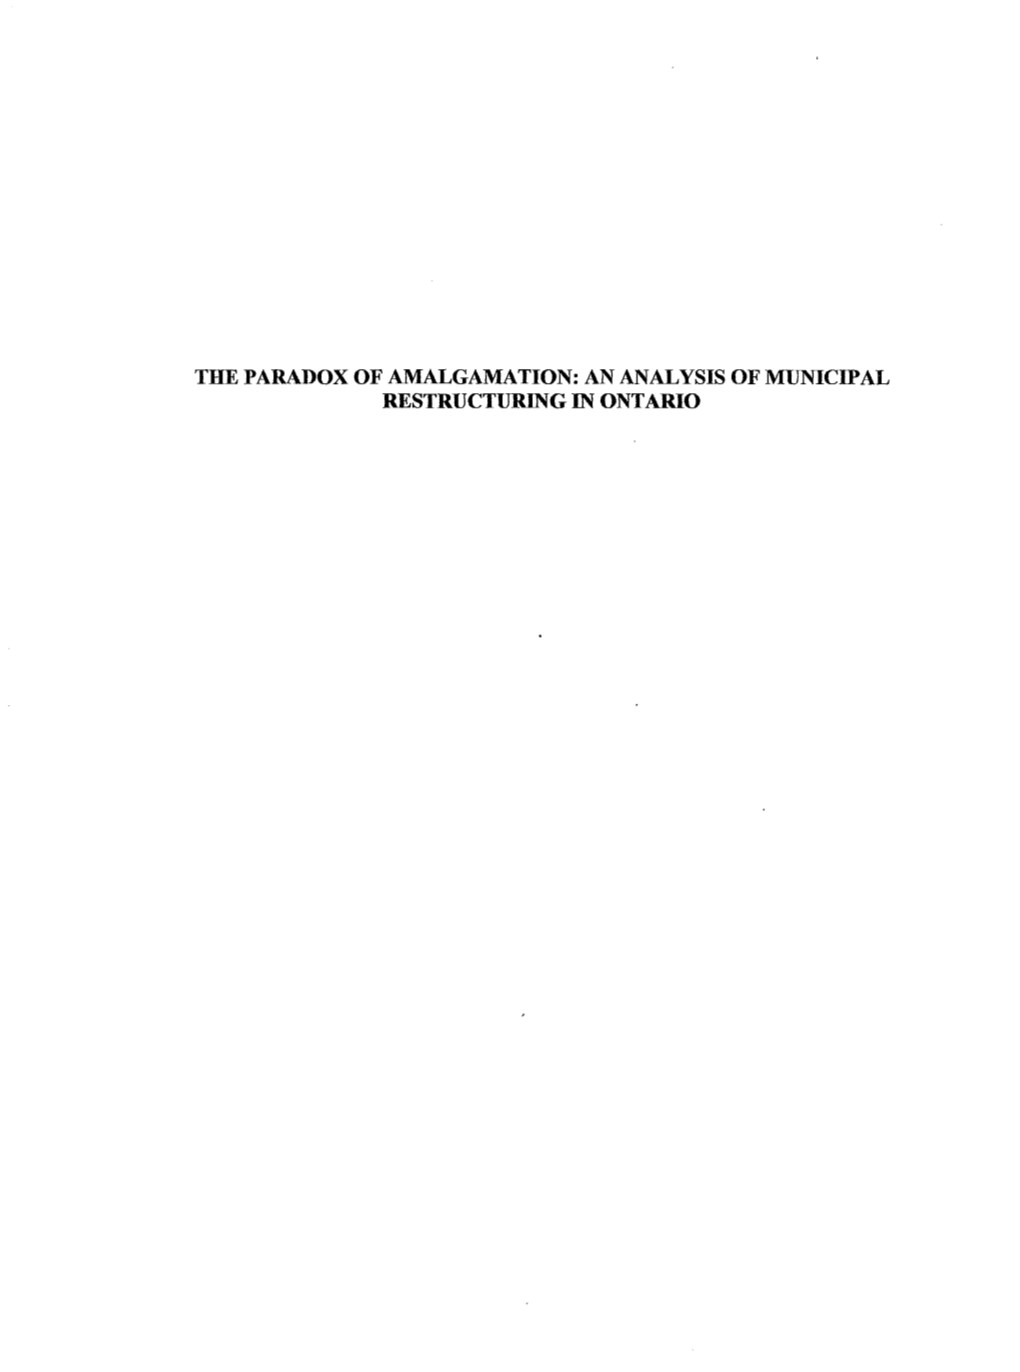 The Paradox of Amalgamation: an Analysis of Municipal Restructuring in Ontario the Paradox of Amalgamation: an Analysis of Municipal Restructuring in Ontario